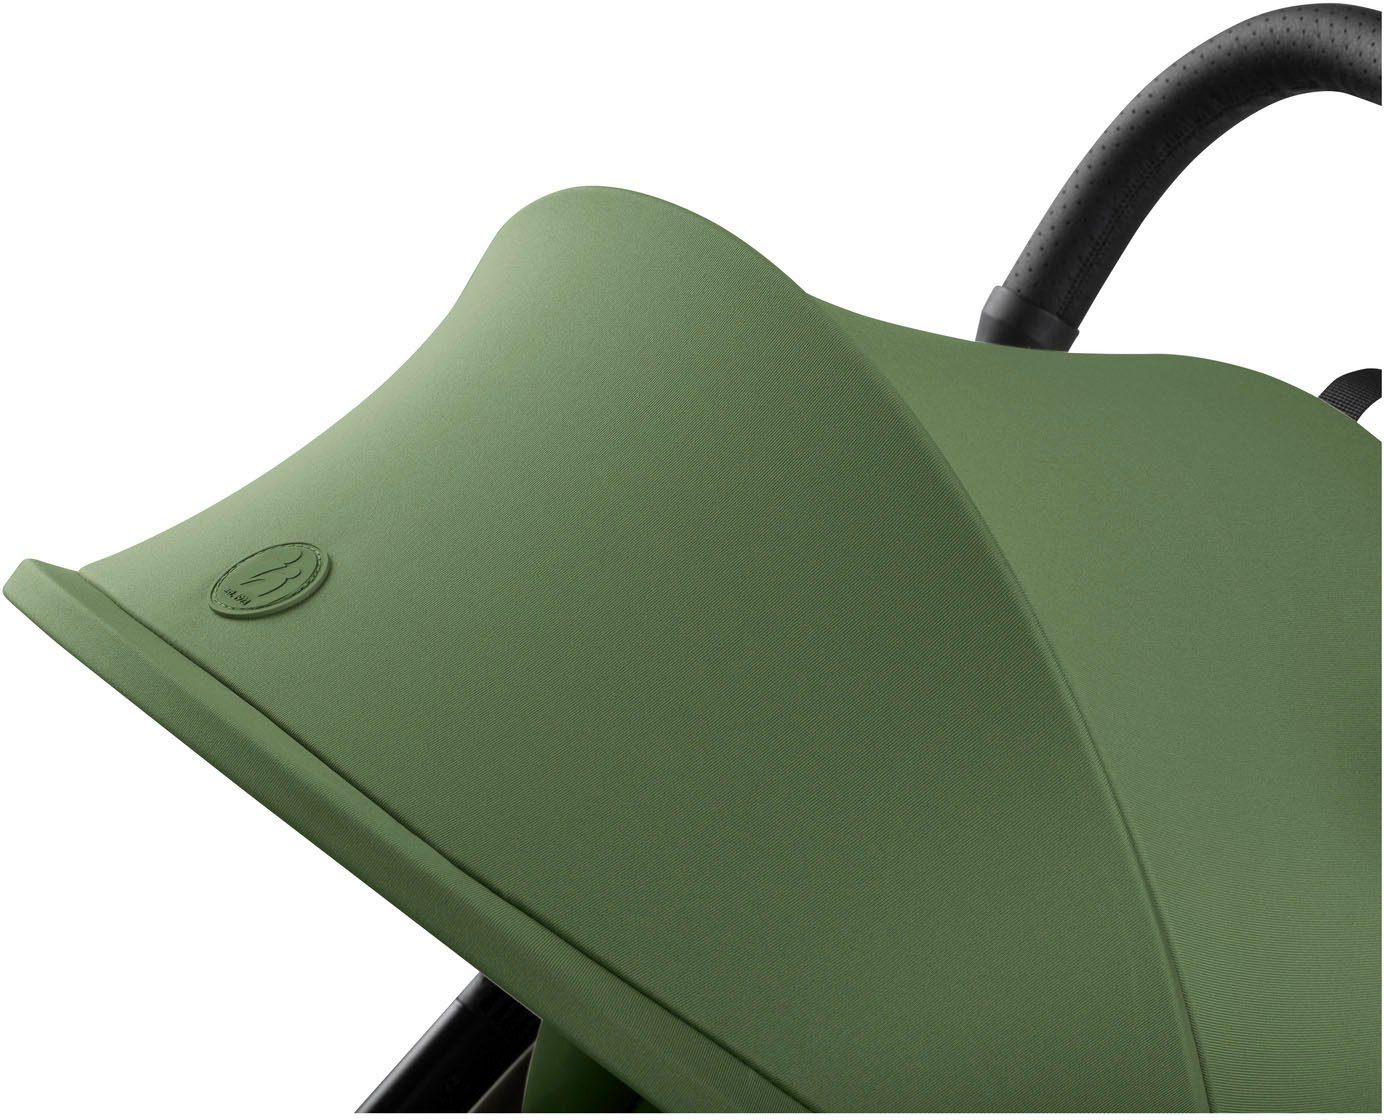 Care Hauck Kinder-Buggy N green Buggy, Travel Plus